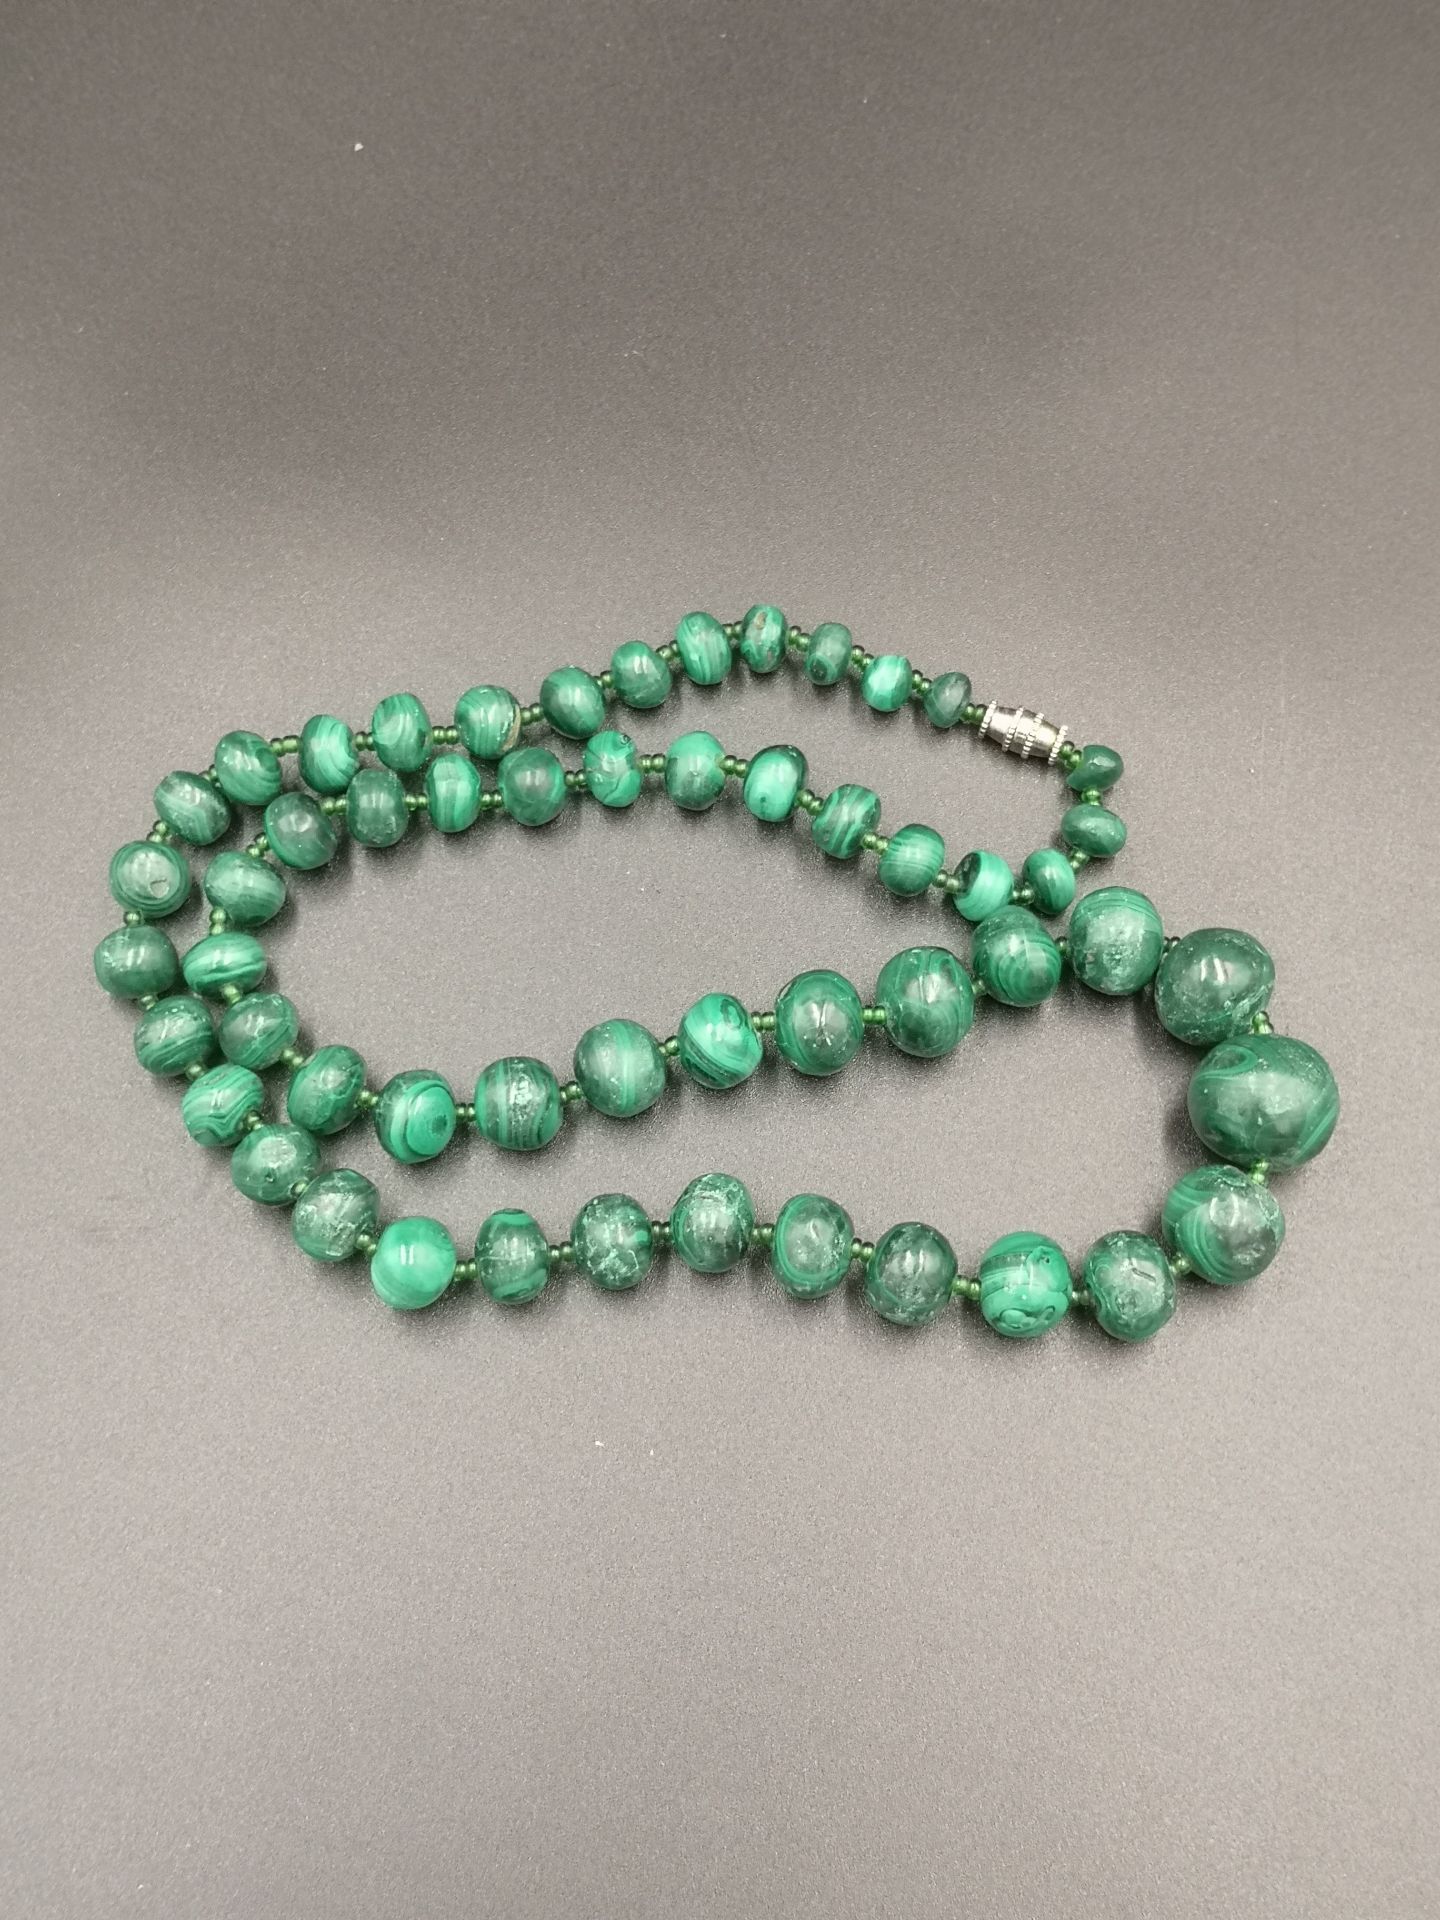 Malachite necklace together with an onyx necklace - Image 4 of 6